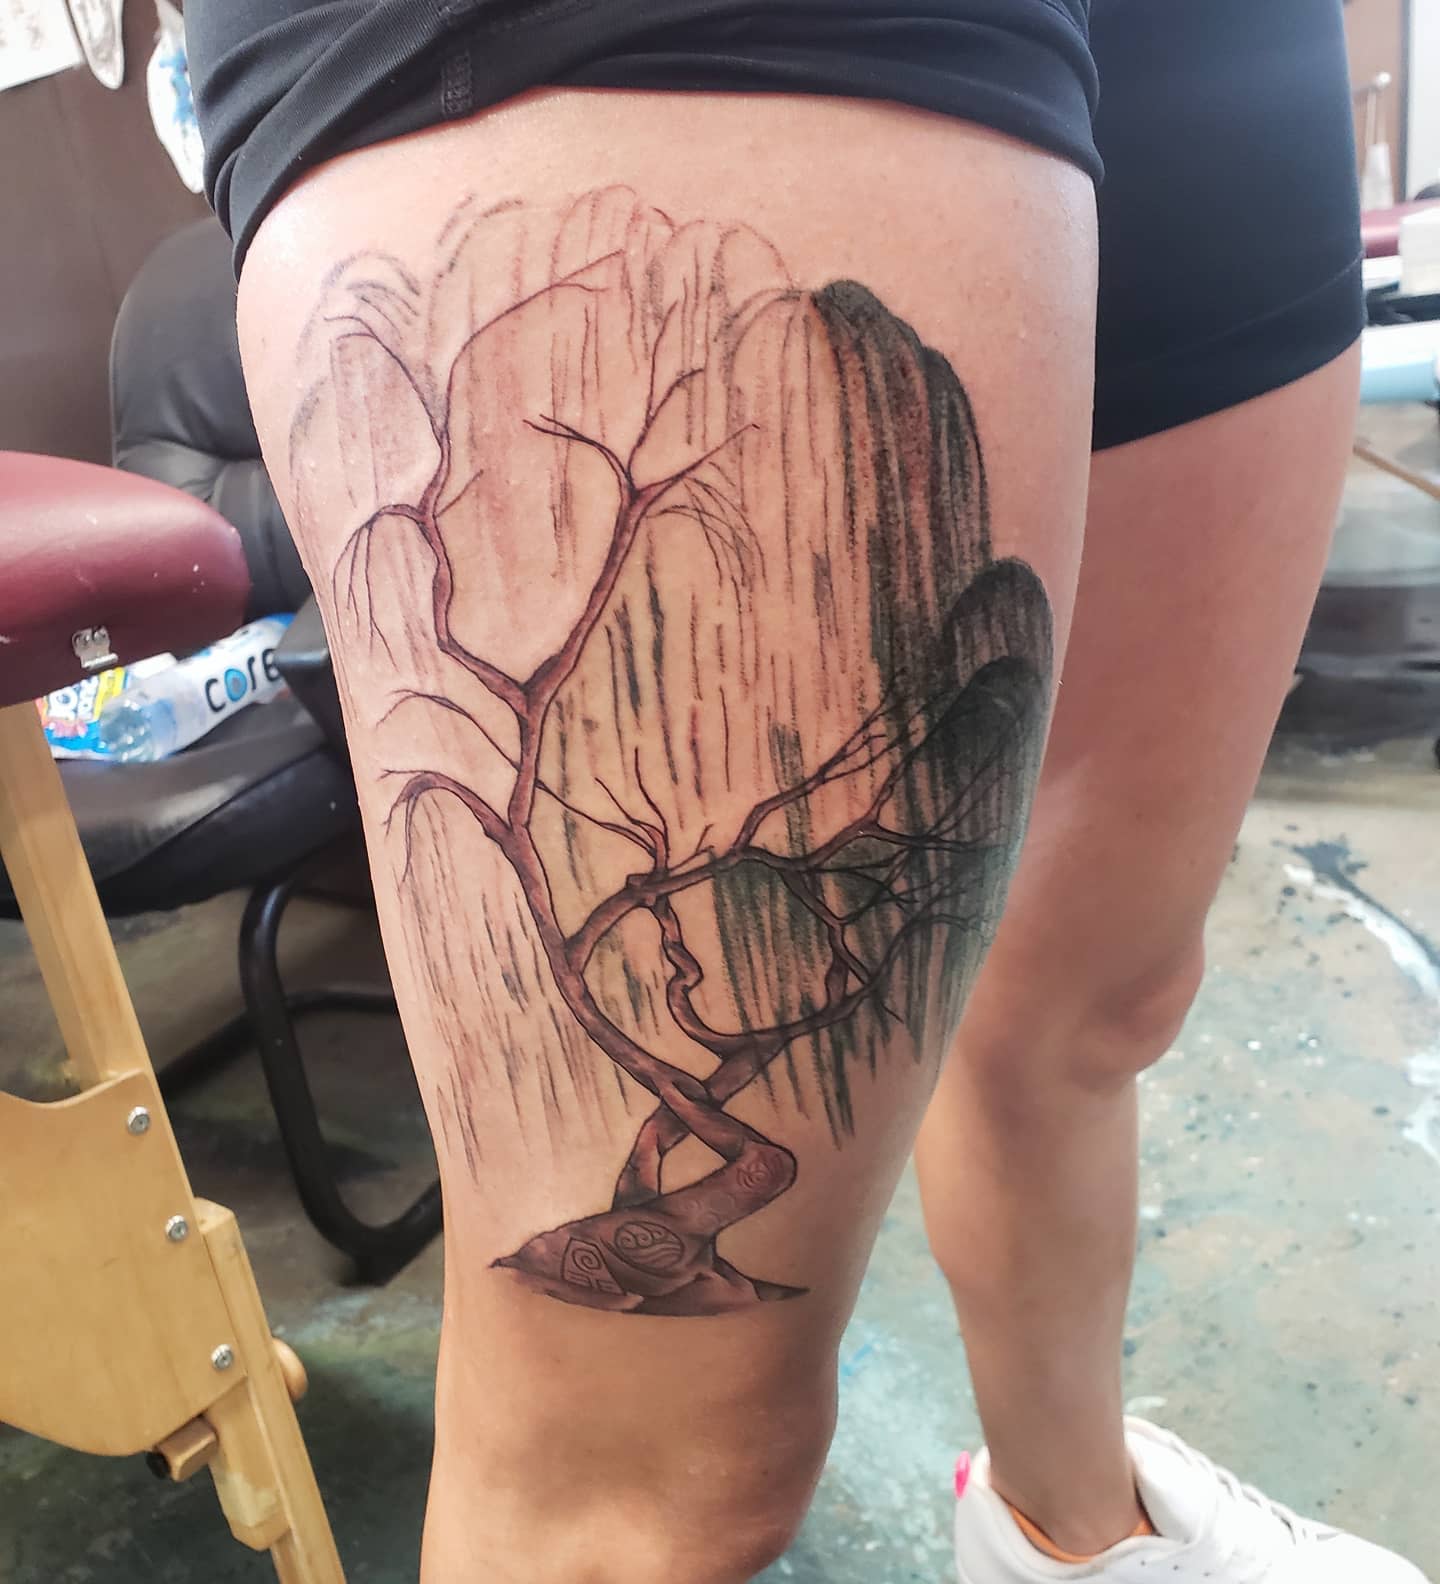 Traditional or Neotrad Weeping Willow Tattoo -katscratchkatie